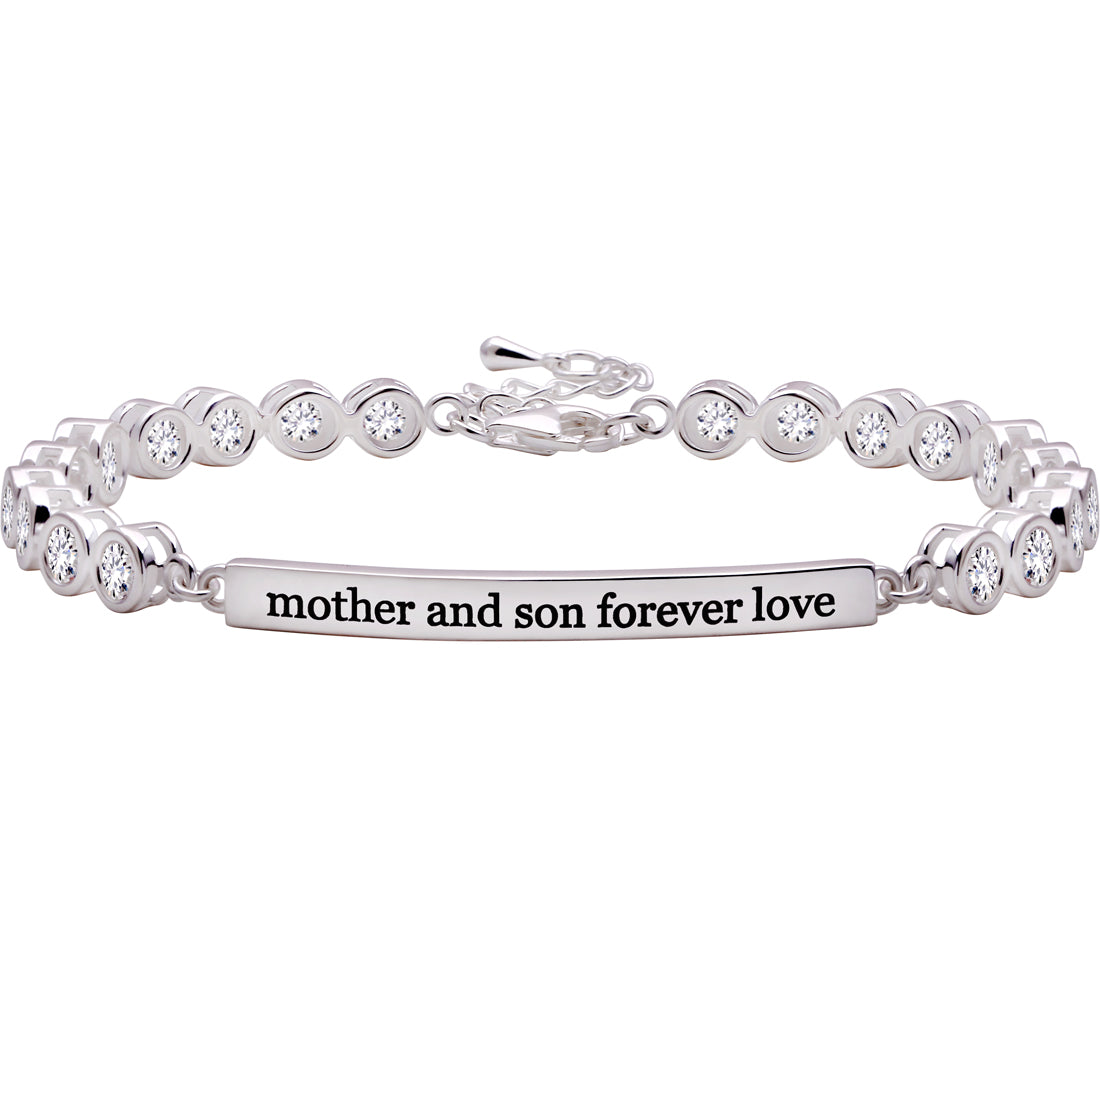 ALOV Jewelry Sterling Silver "mother and son forever love" Cubic Zirconia Bracelet